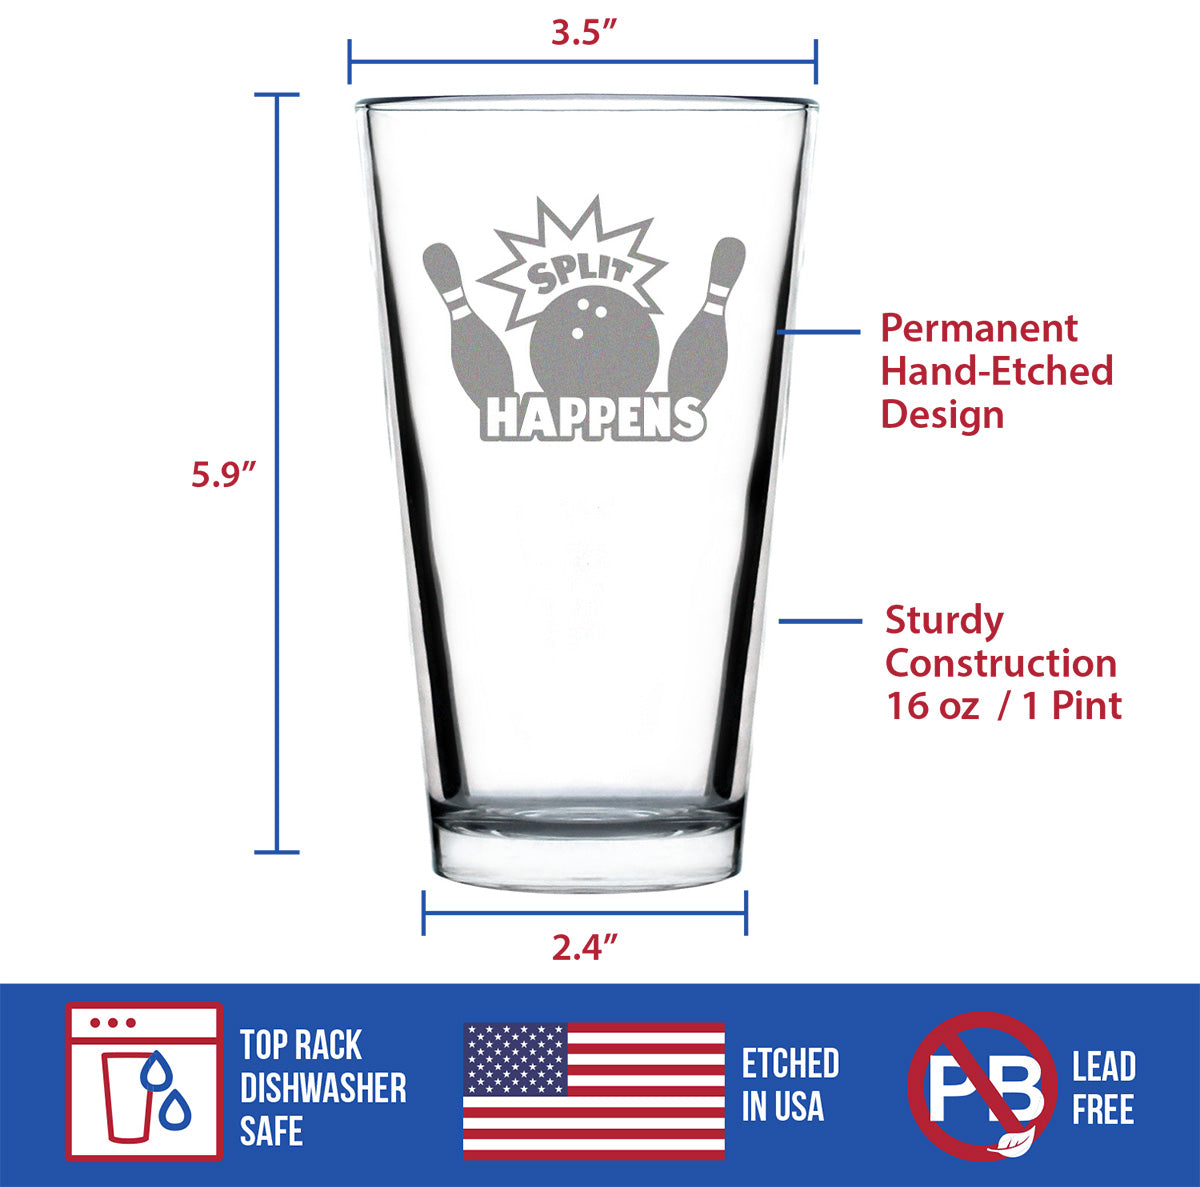 Split Happens - Pint Glass for Beer - Funny Bowling Themed Gifts and Decor for Bowlers - 16 oz Glass